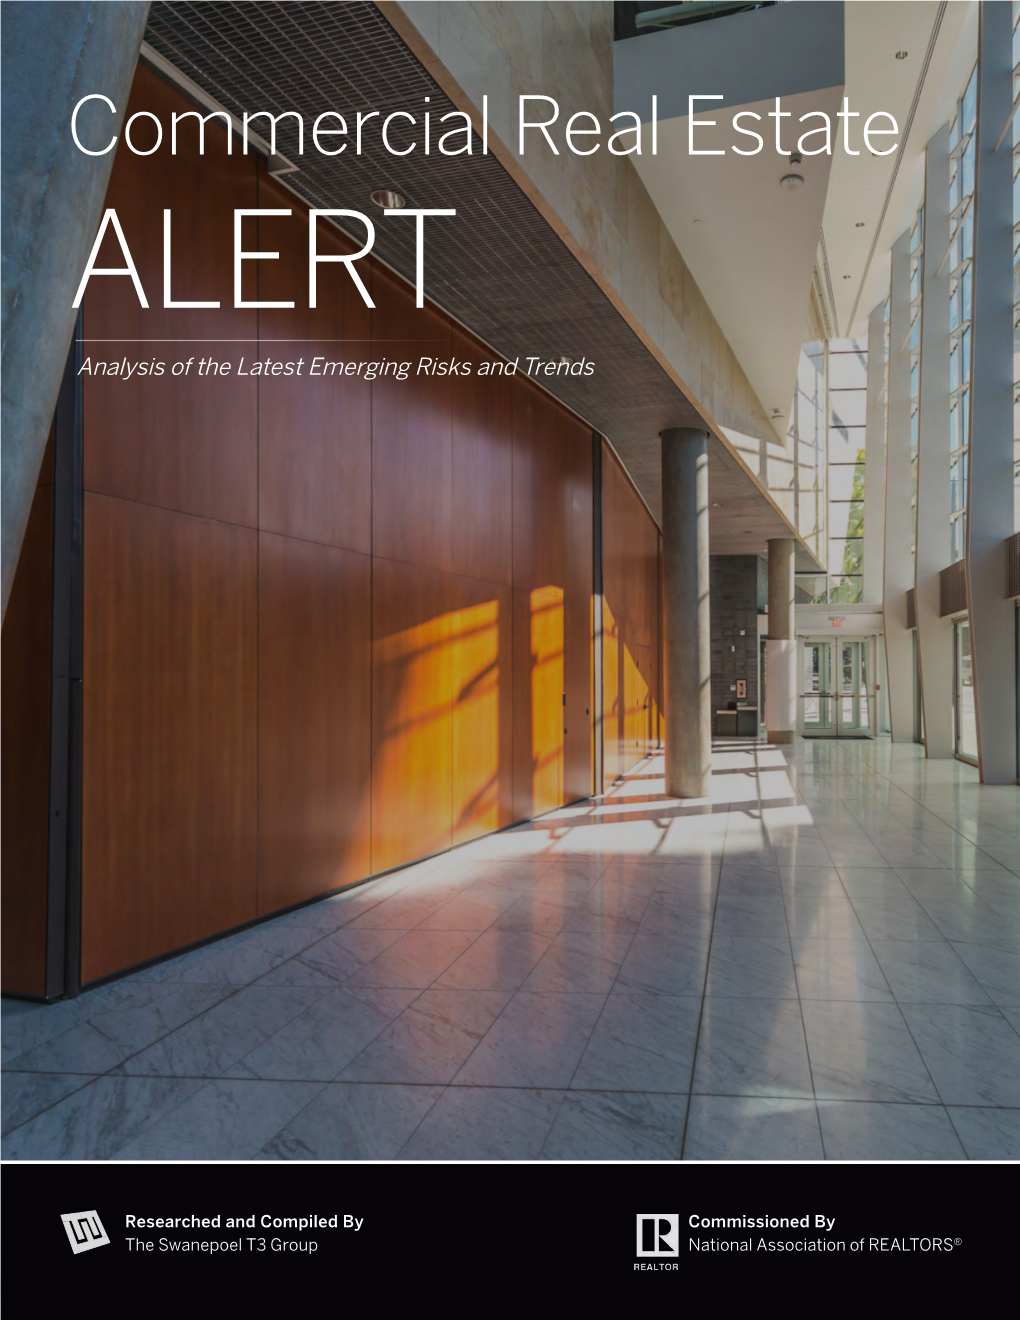 Commercial Real Estate ALERT Analysis of the Latest Emerging Risks and Trends